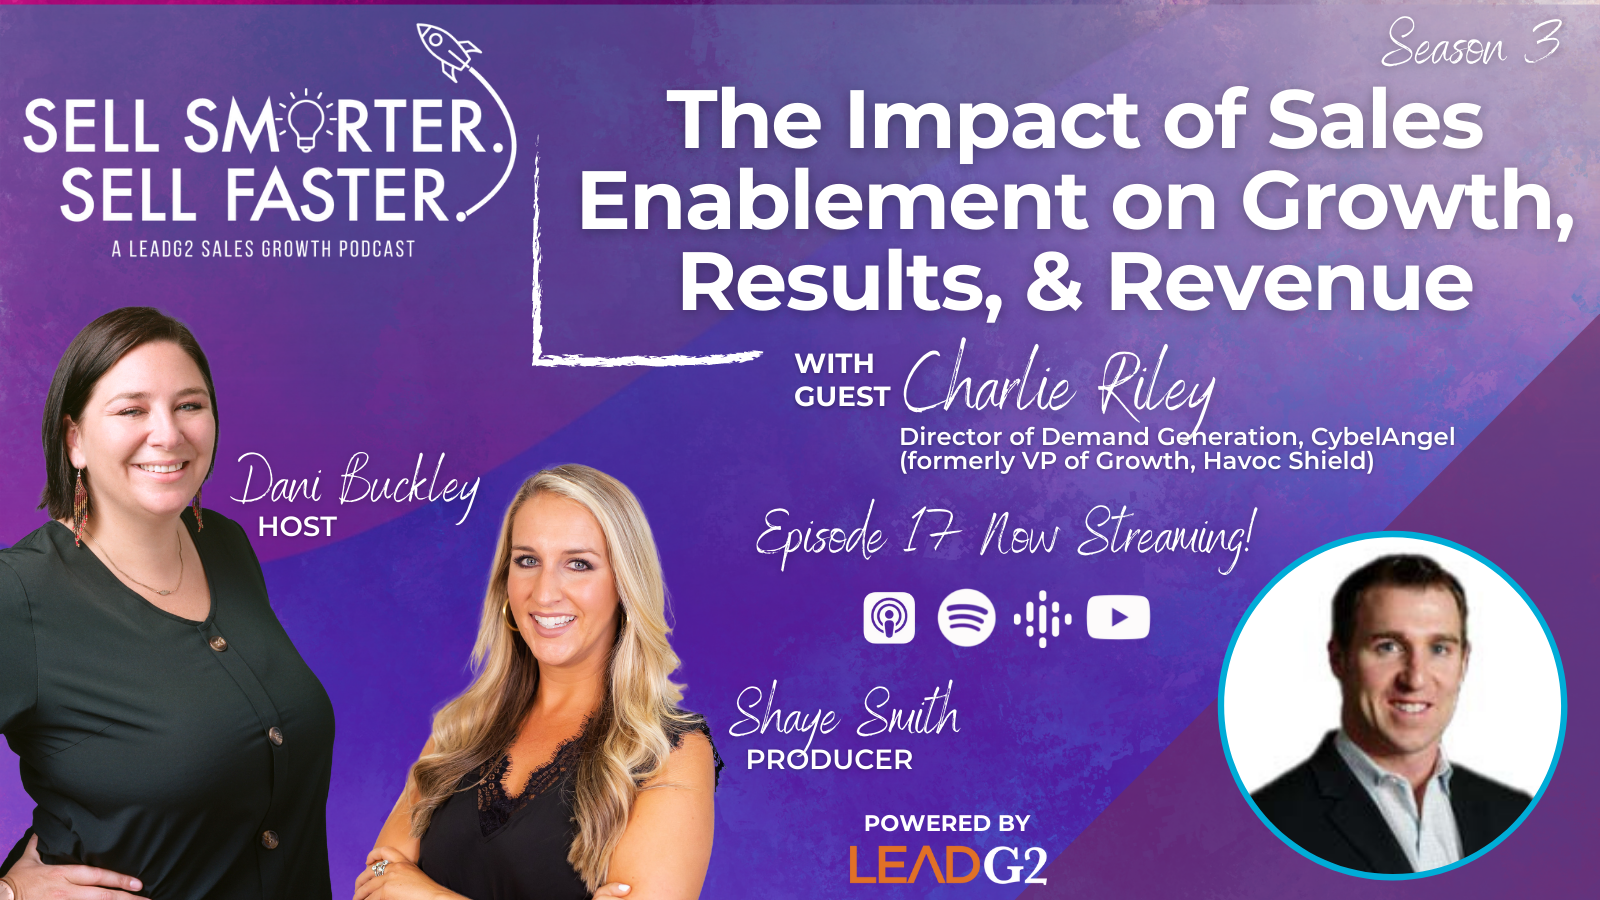 The Impact of Sales Enablement on Growth, Results, & Revenue with Charlie Riley